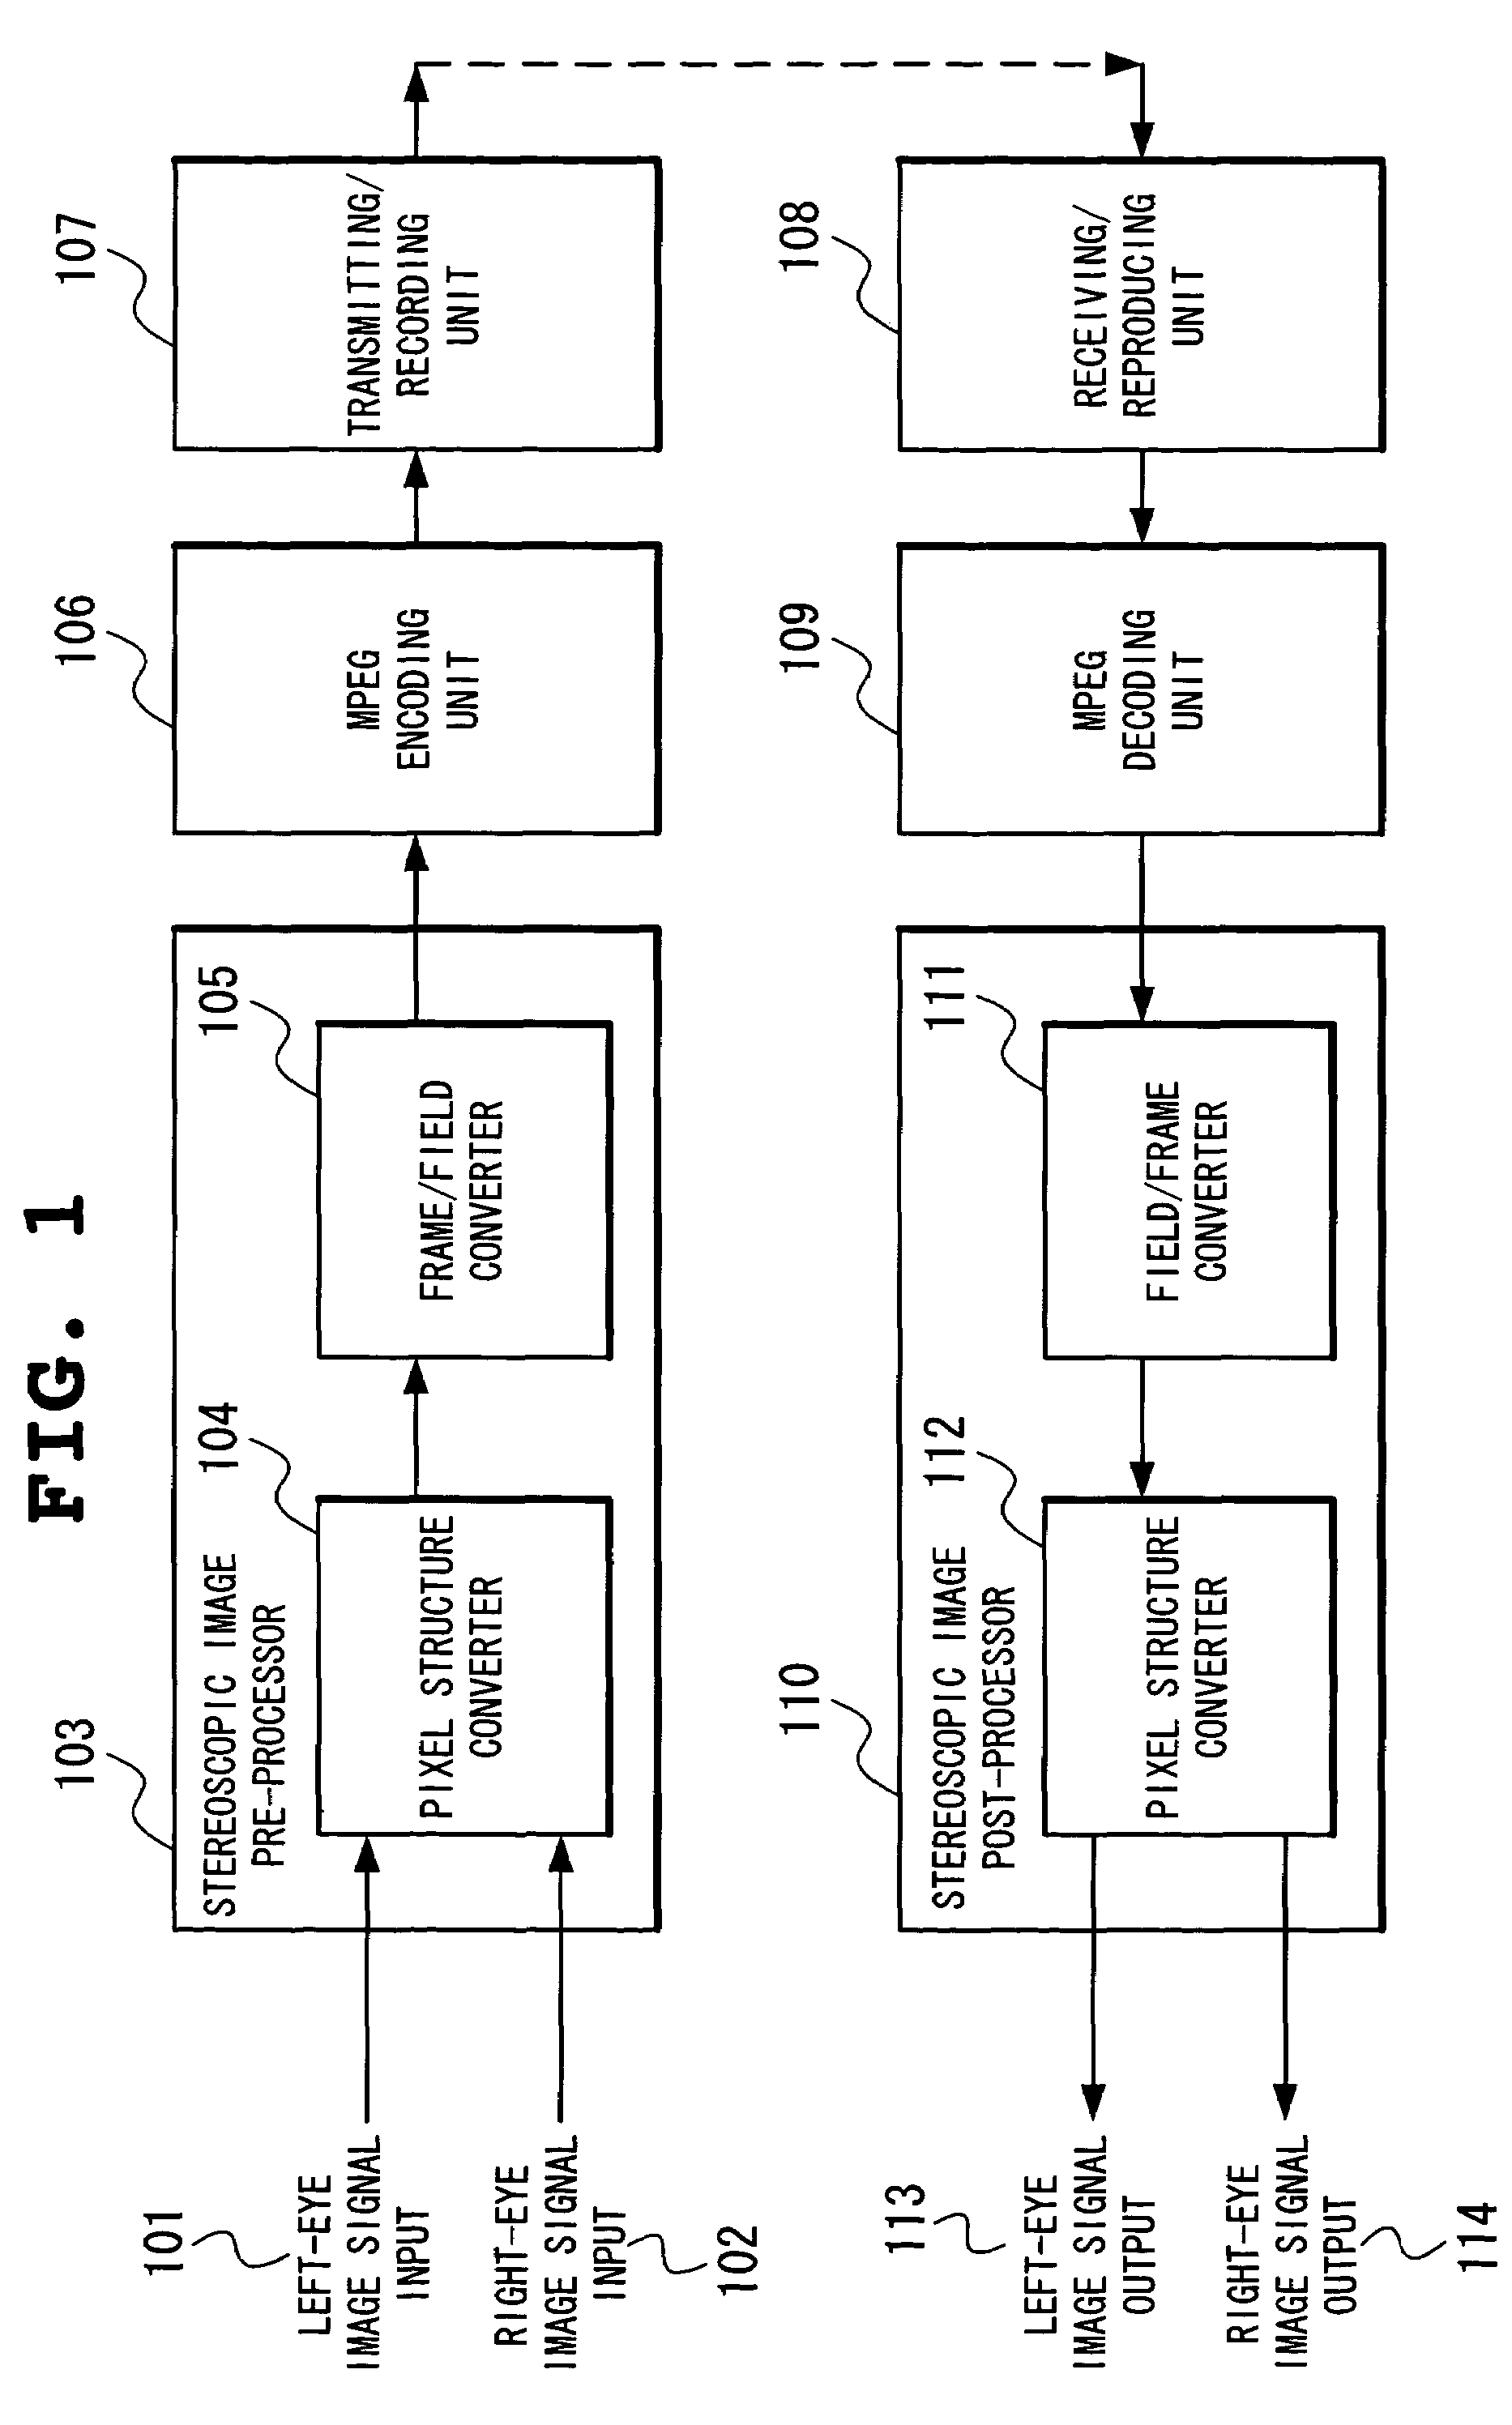 Stereoscopic image encoding and decoding device multiplexing high resolution added images